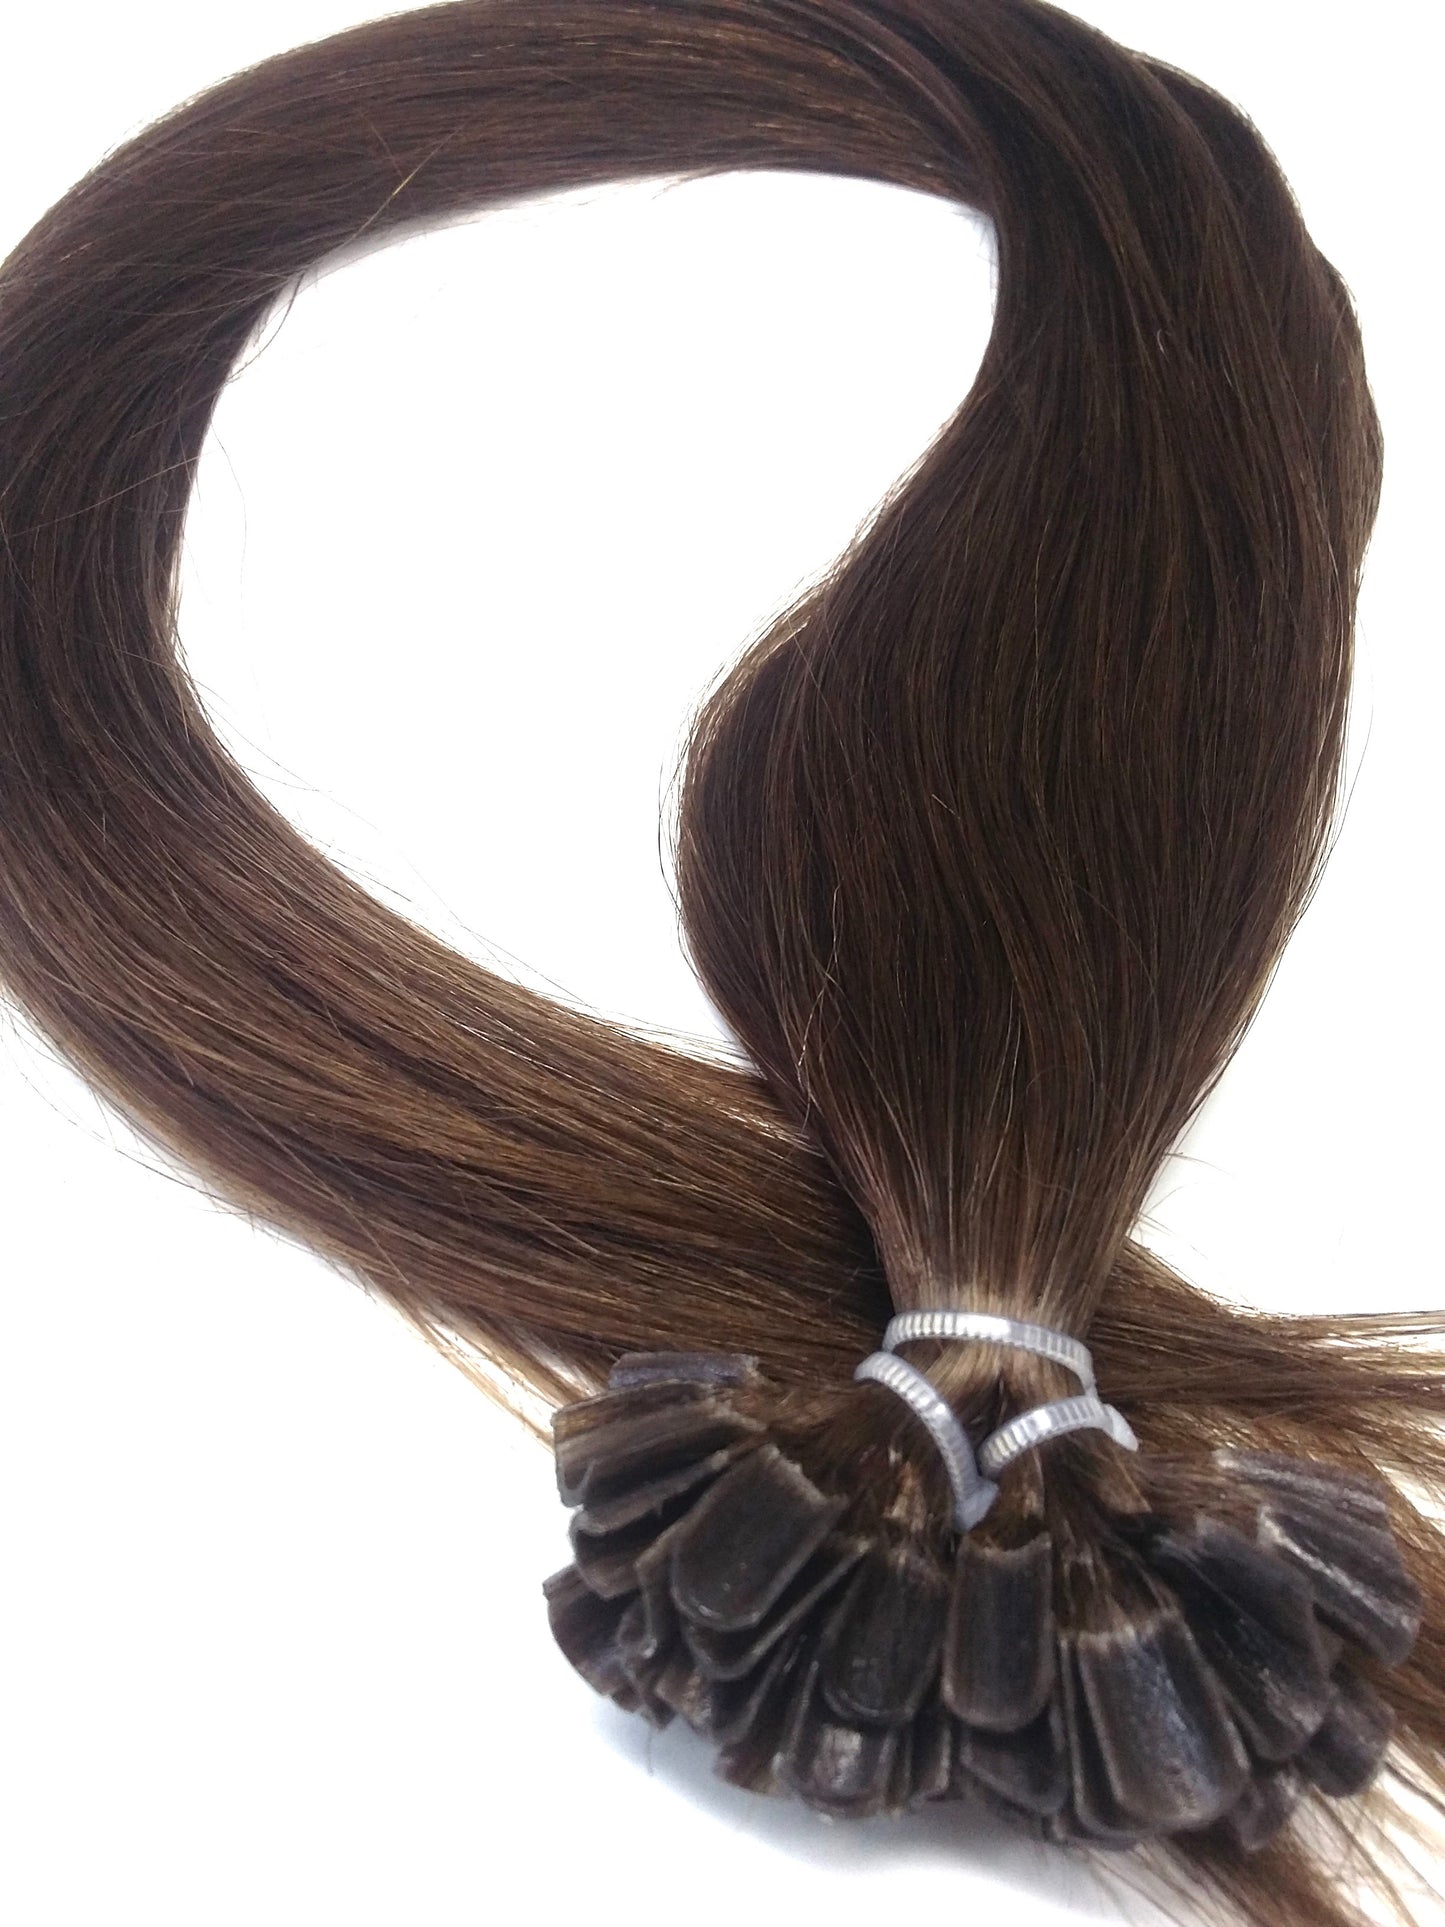 Russian Remy Human Hair, 1g Utips, Straight, 24'', Colour 4, 50g, Quick Shipping!